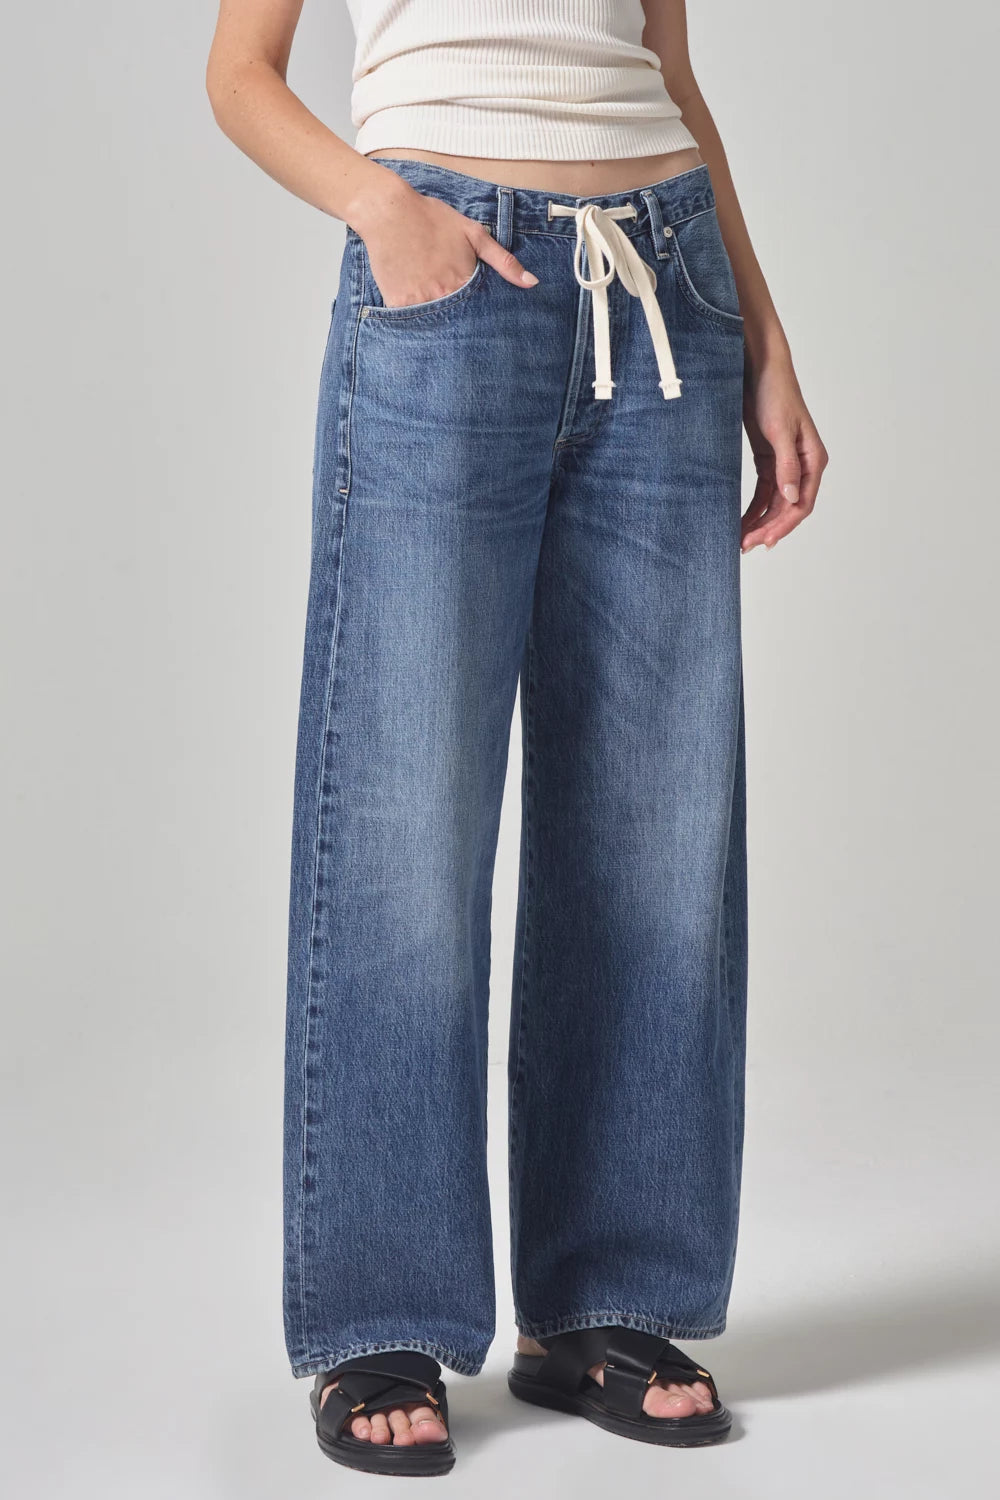 Brynn Drawstring Trouser Pants Citizens of Humanity   